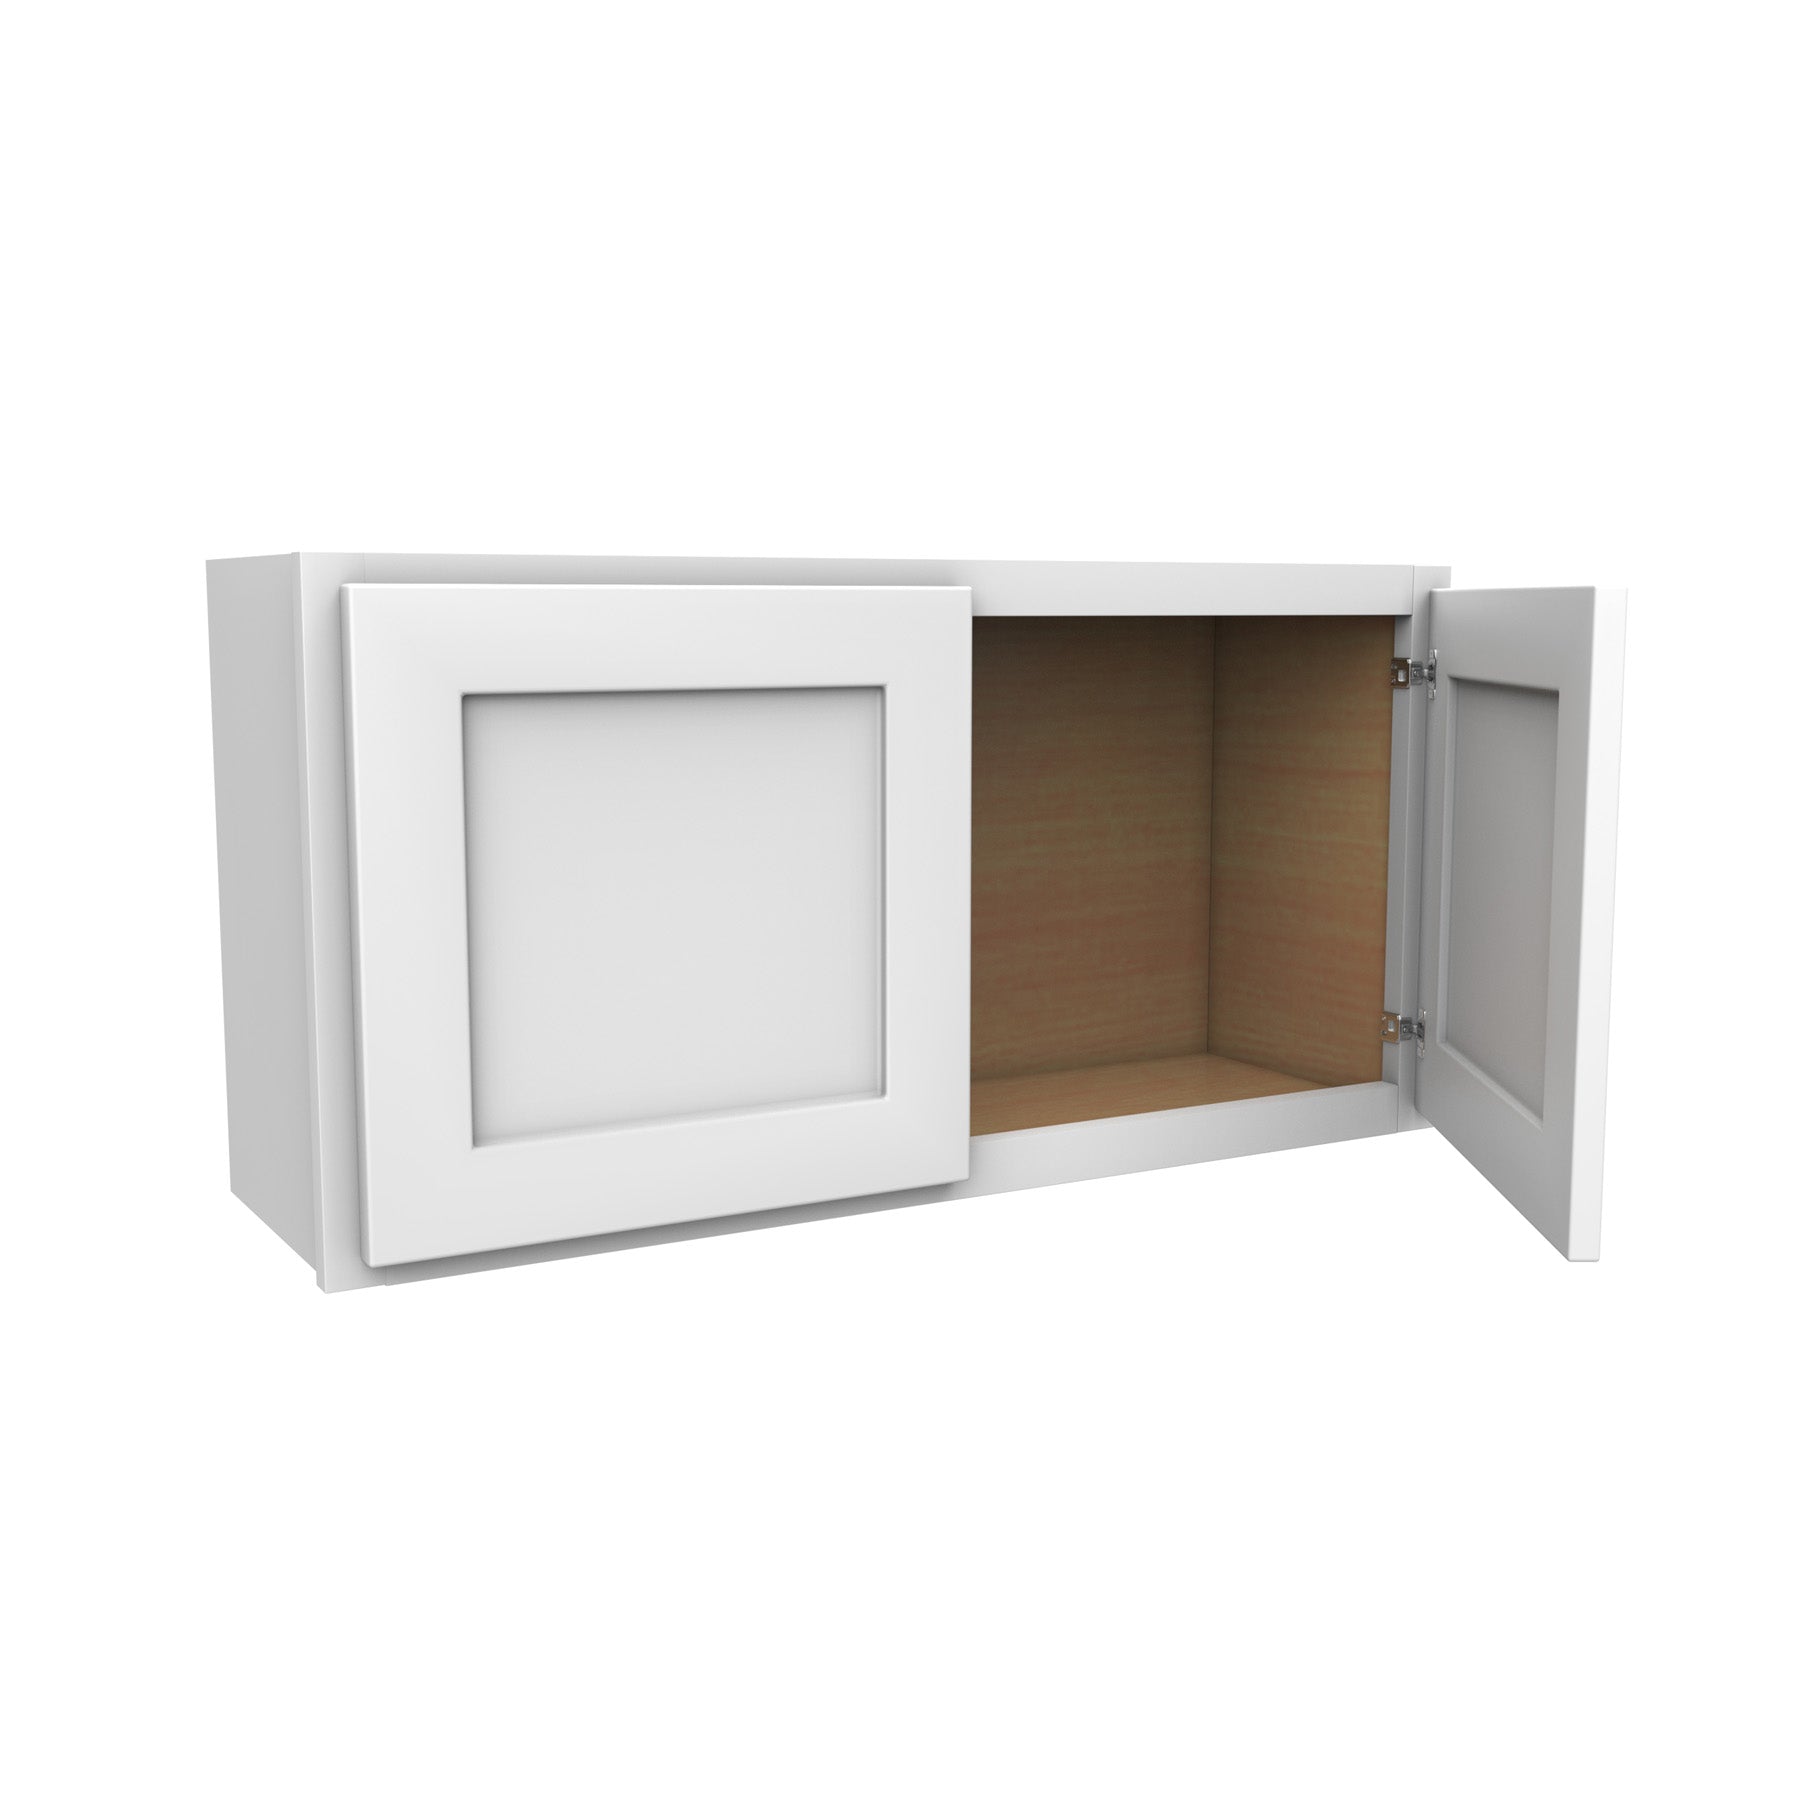 Luxor White - Double Door Wall Cabinet | 36"W x 18"H x 12"D